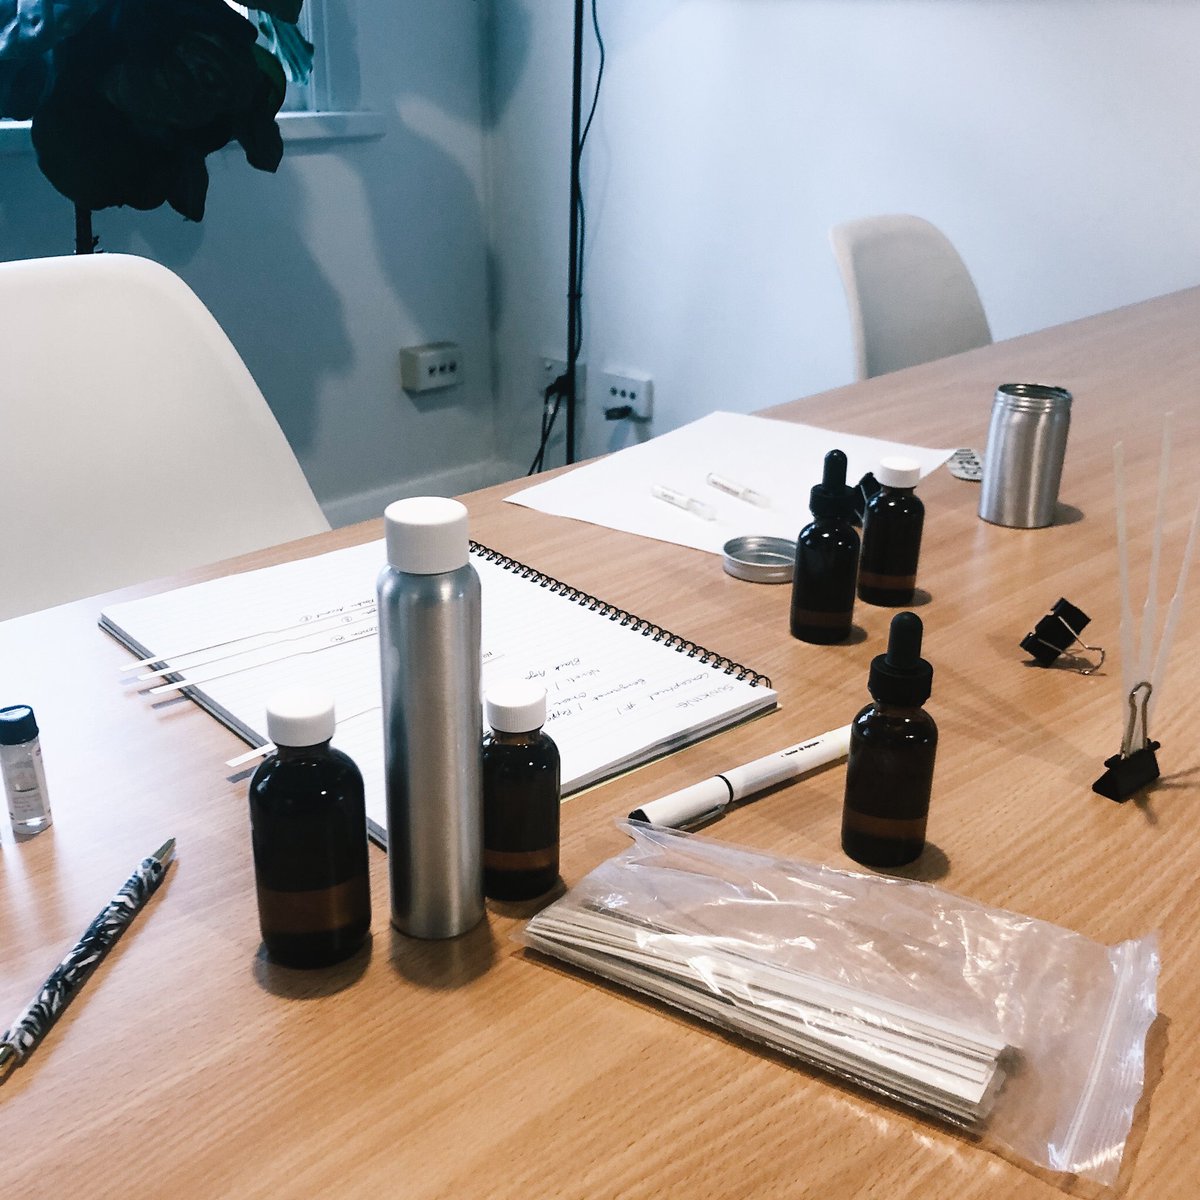 So it begins... Concepts in mind, now to make it play like it should🧐 Creation of the debut #houseofjames parfum is thoroughly underway. #nichecommunity #parfum #sun #perfumery #creation